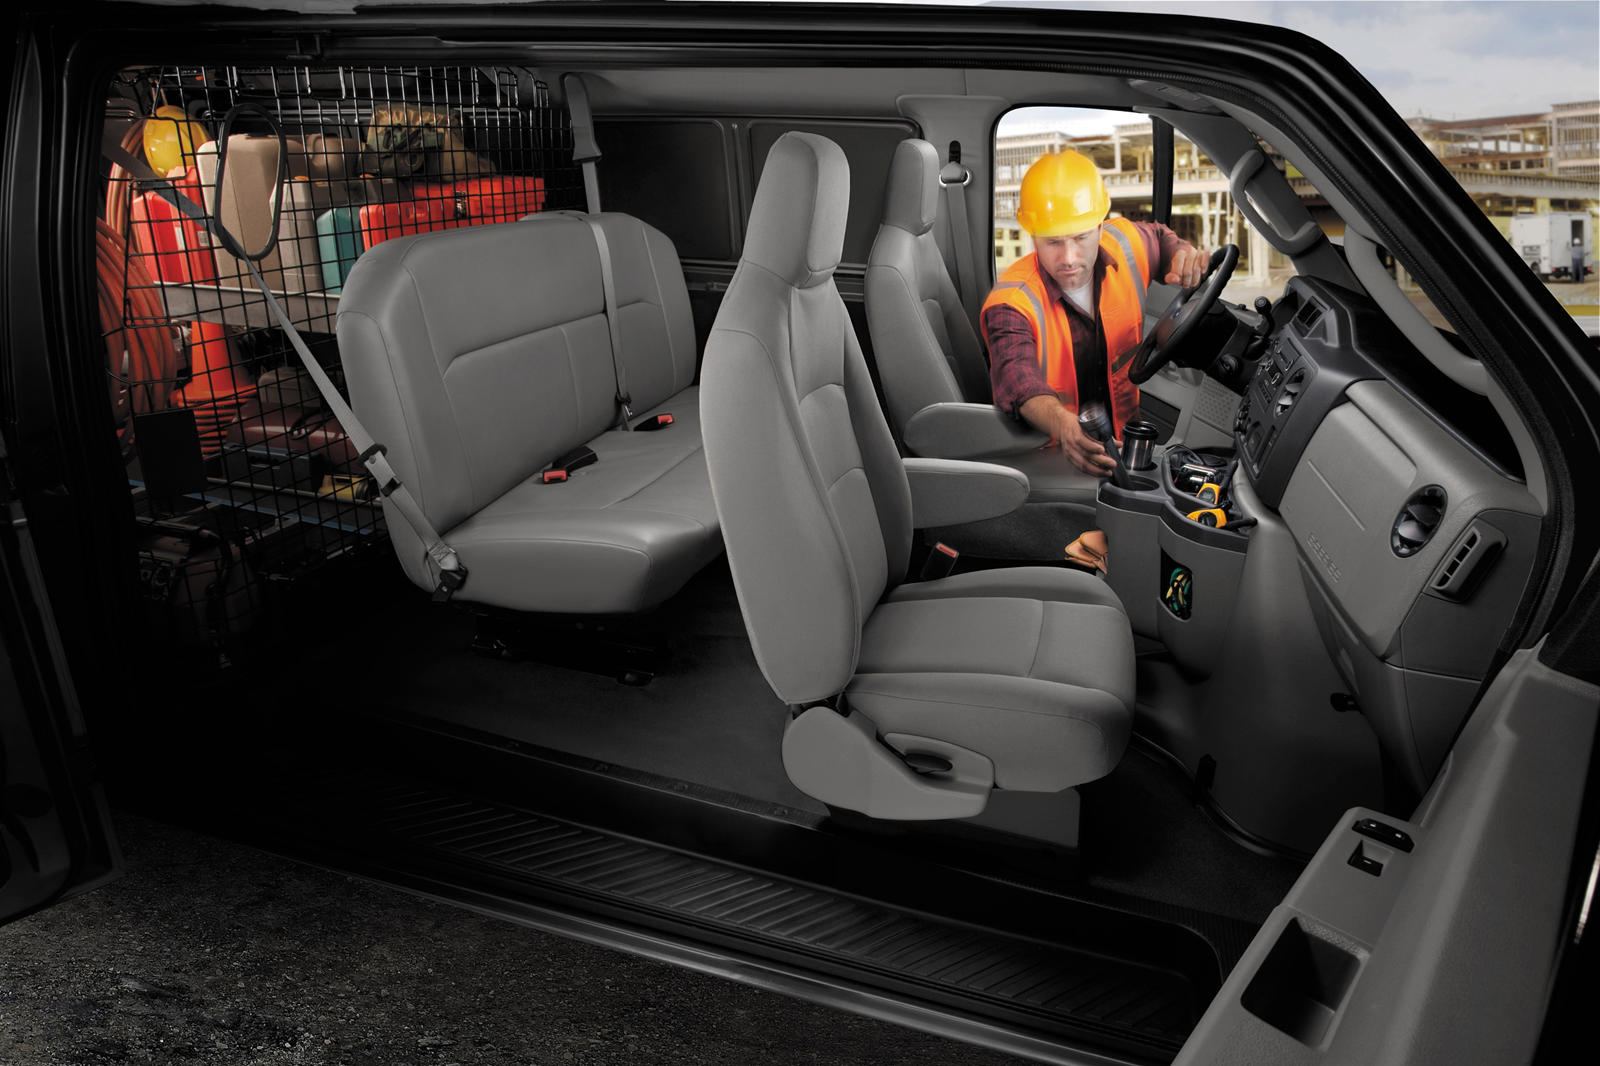 Charles Keasing Pay attention to Effectiveness 2008 Ford Econoline Cargo Van Interior Photos | CarBuzz